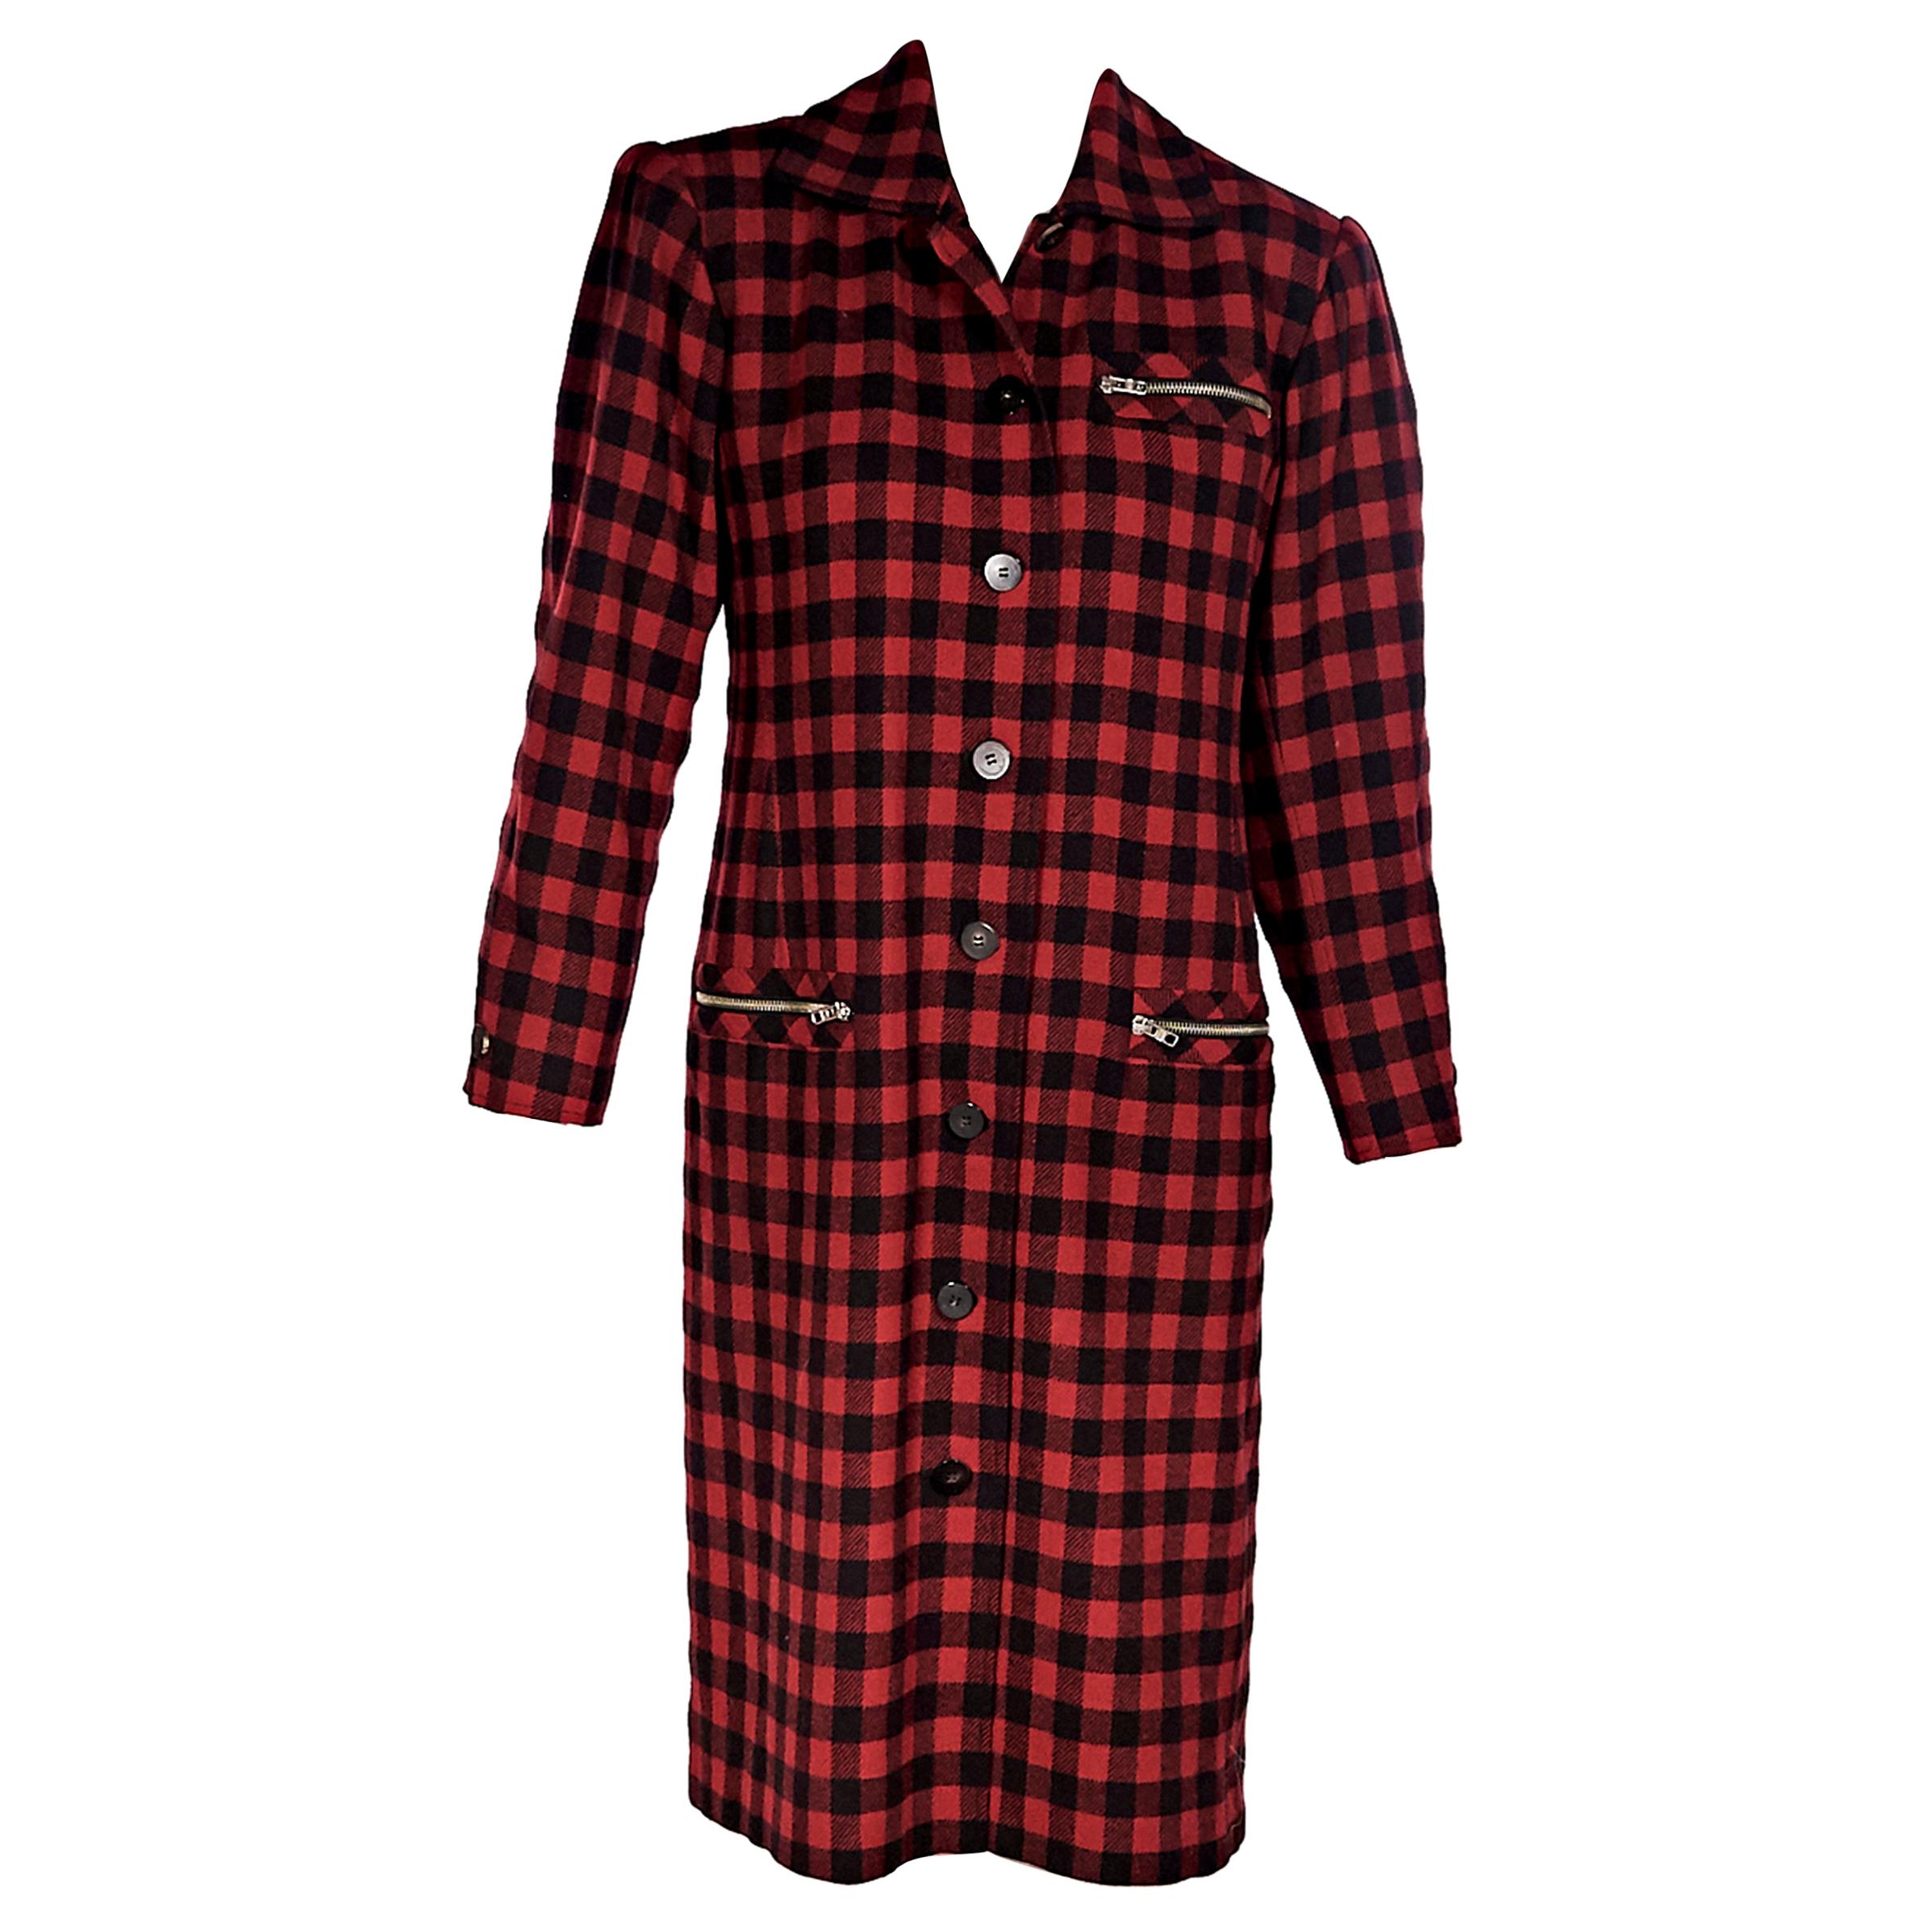 Yves Saint Laurent Red And Black Variation Wool Checkered Jacket